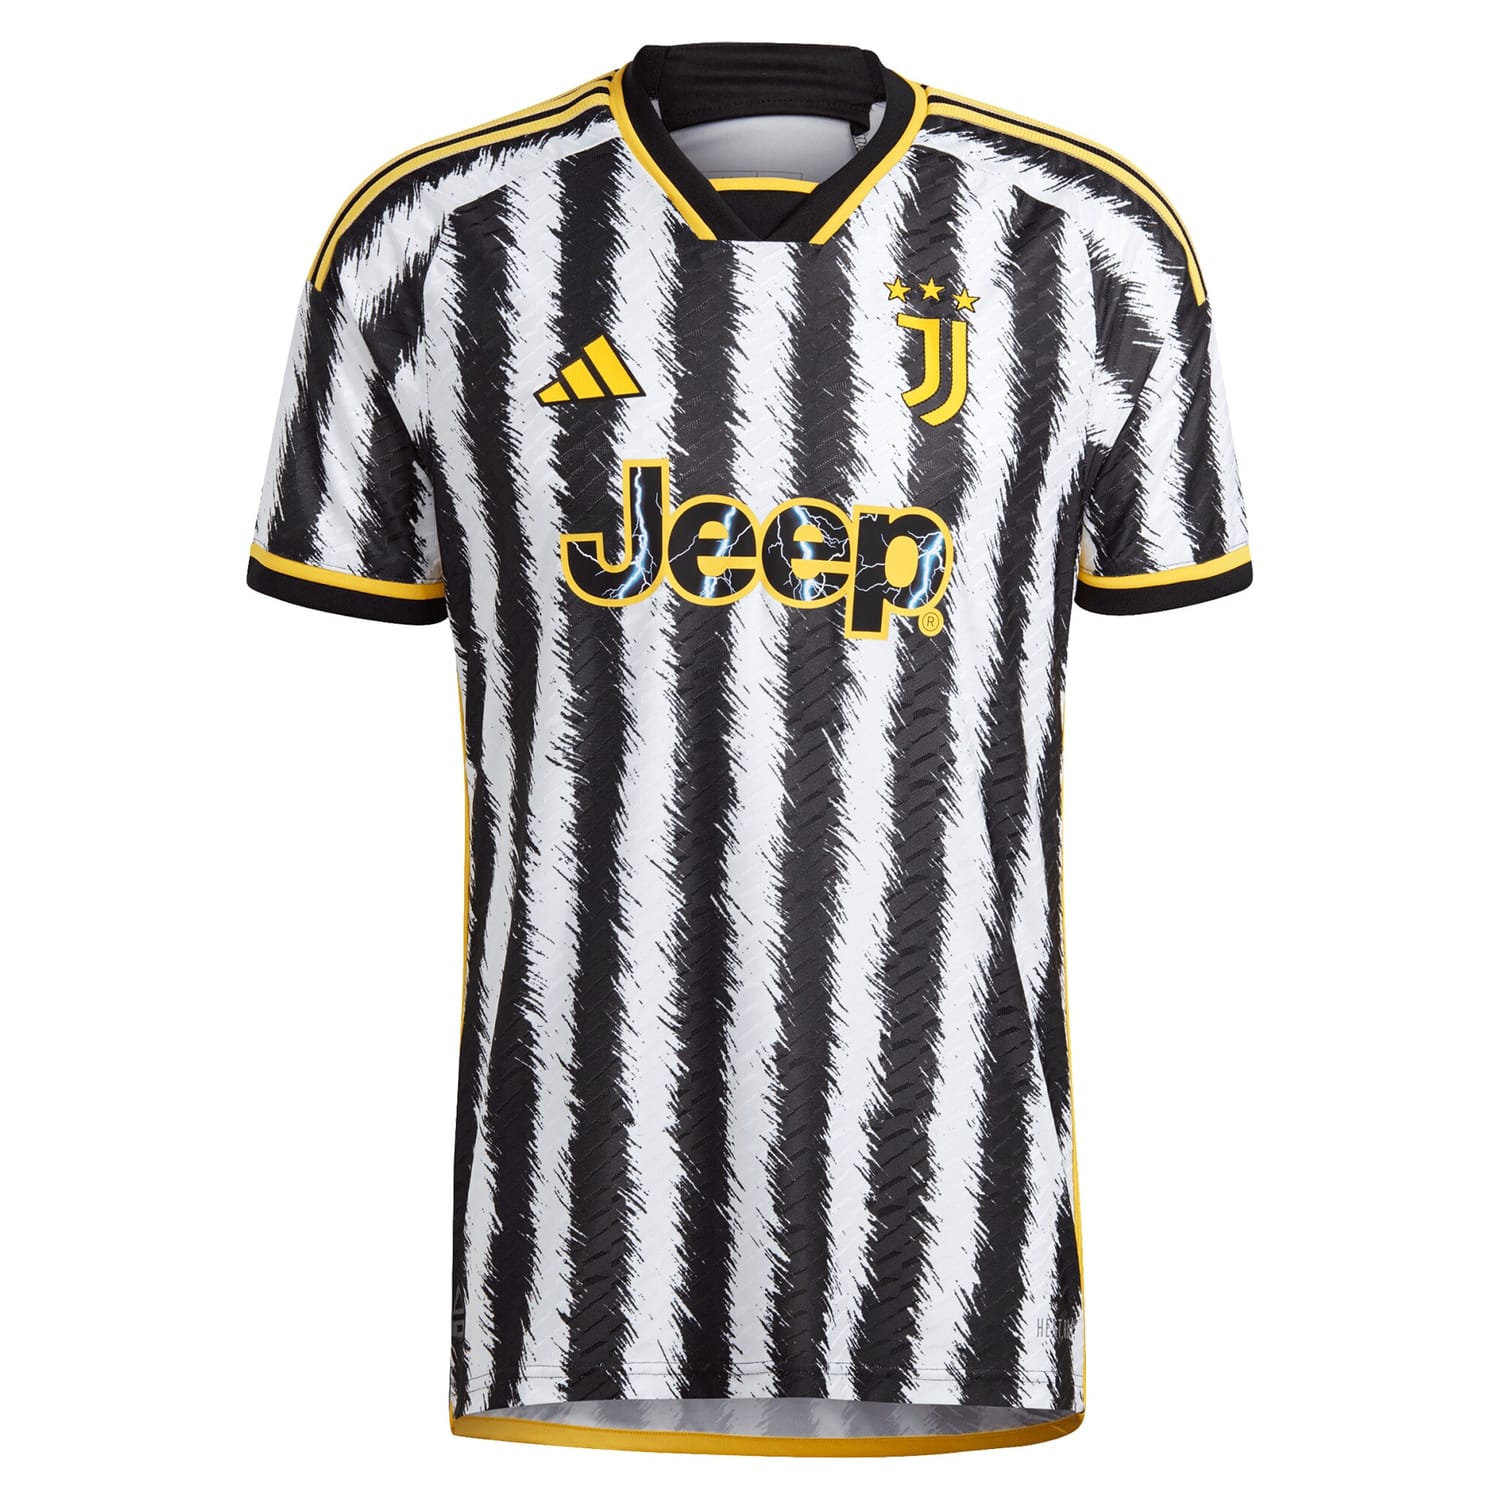 Serie A Juventus Home Authentic Jersey Shirt 2023-24 player Federico Chiesa 7 printing for Men